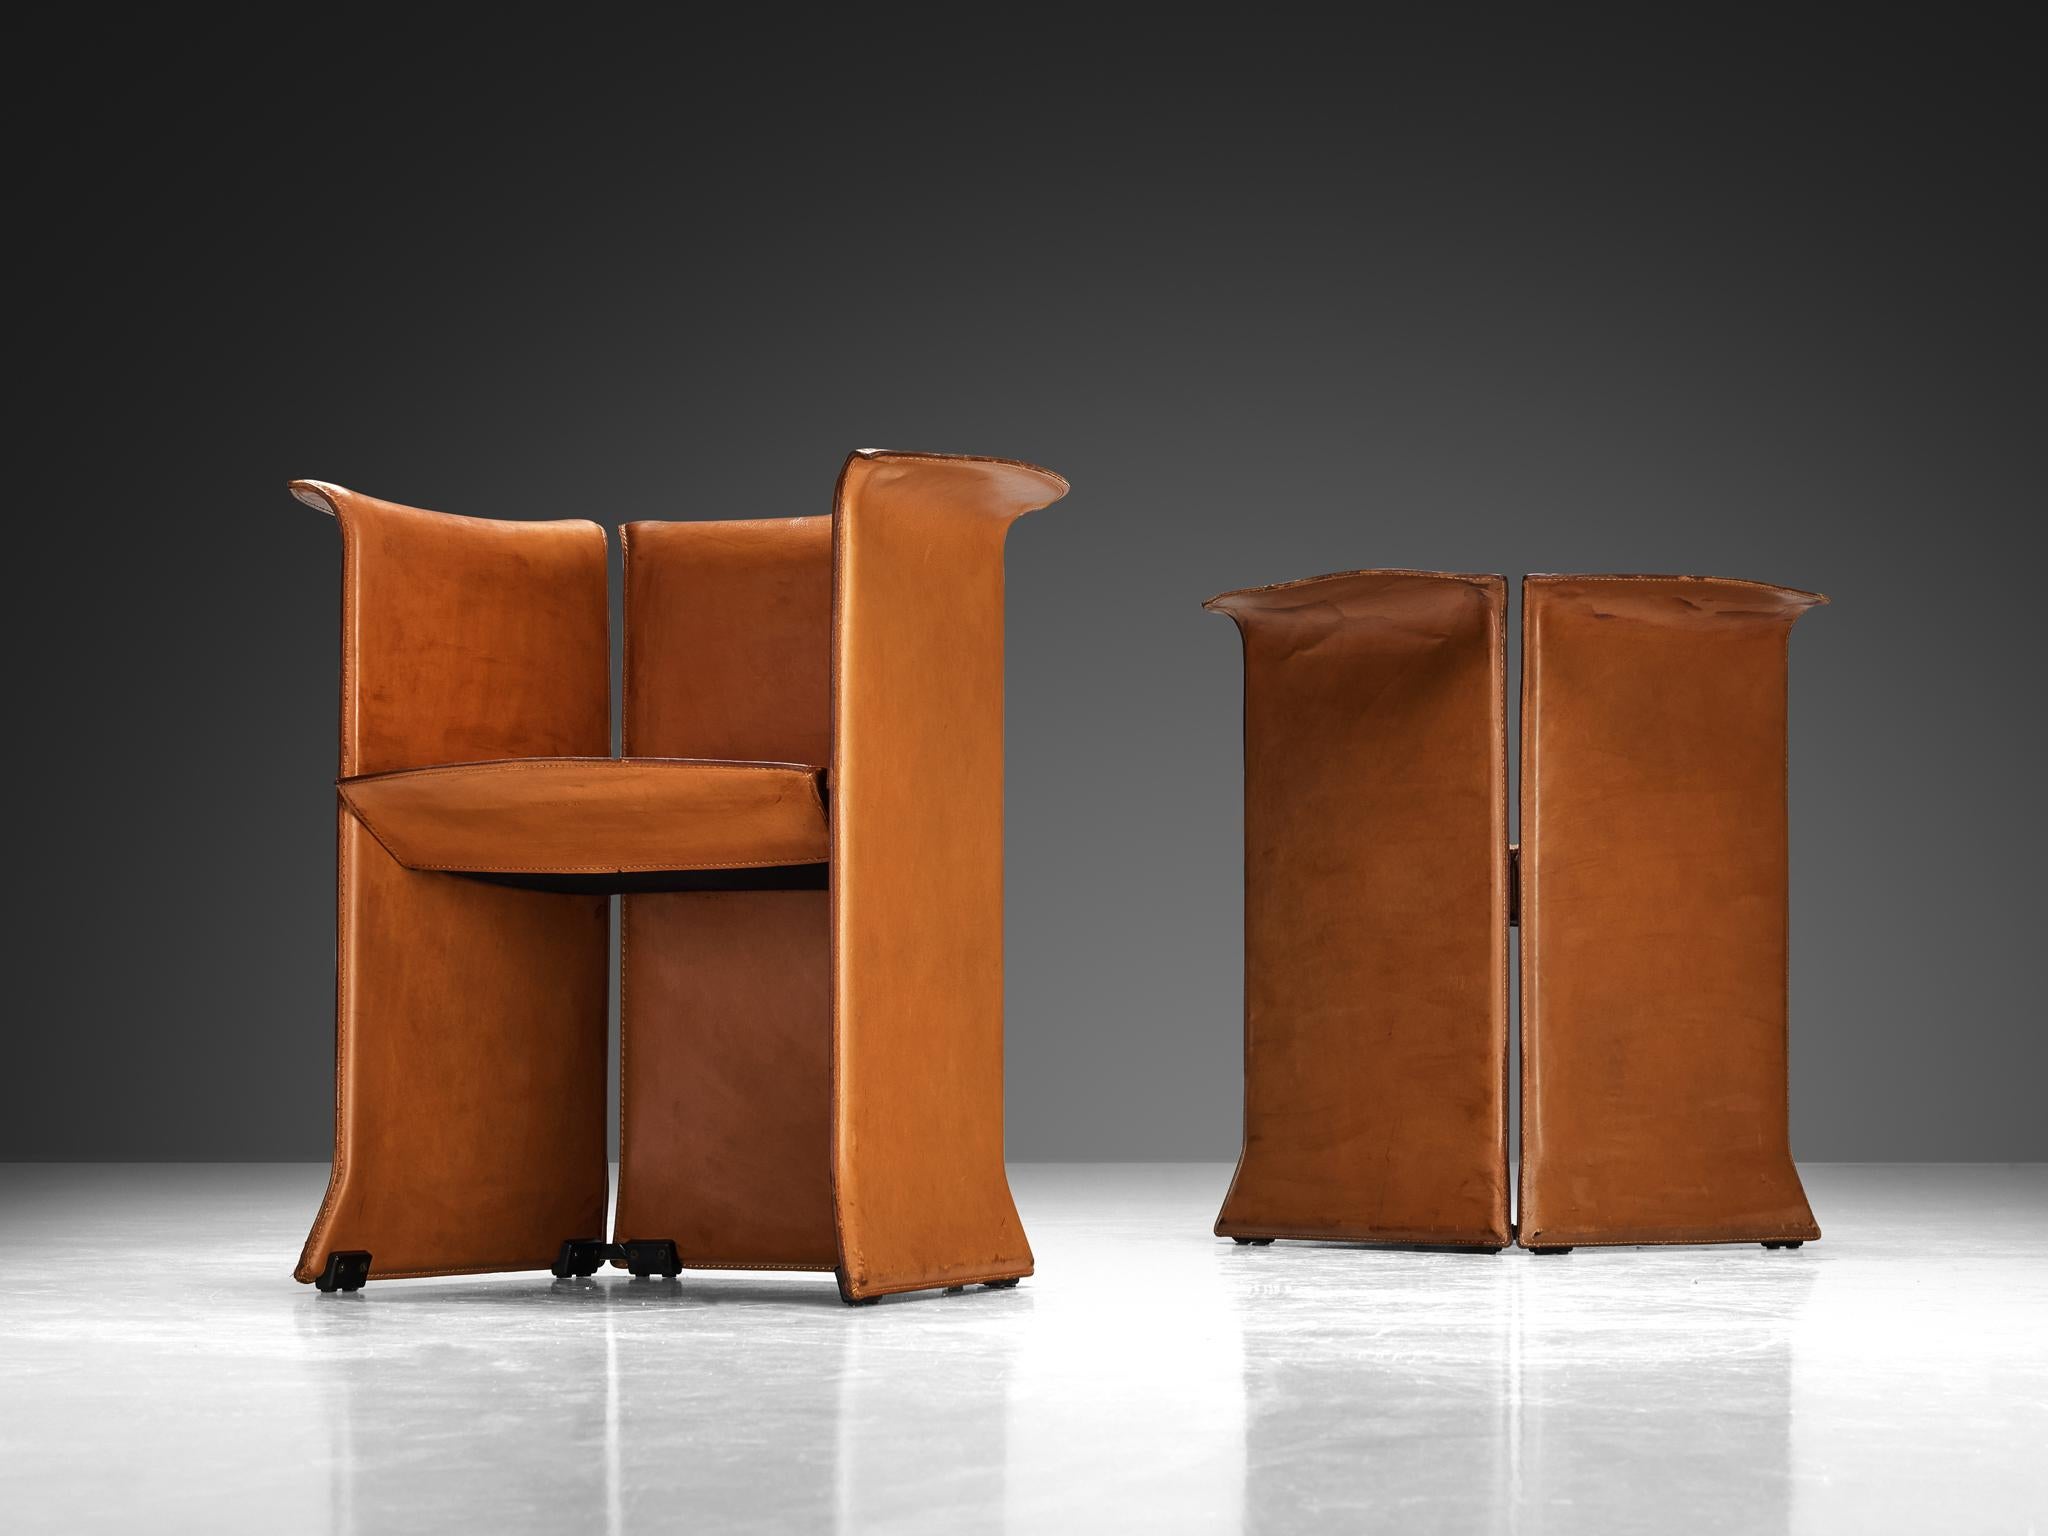 Italian Isao Hosoe for Cassina 'Artù' Armchairs in Cognac Brown Leather For Sale